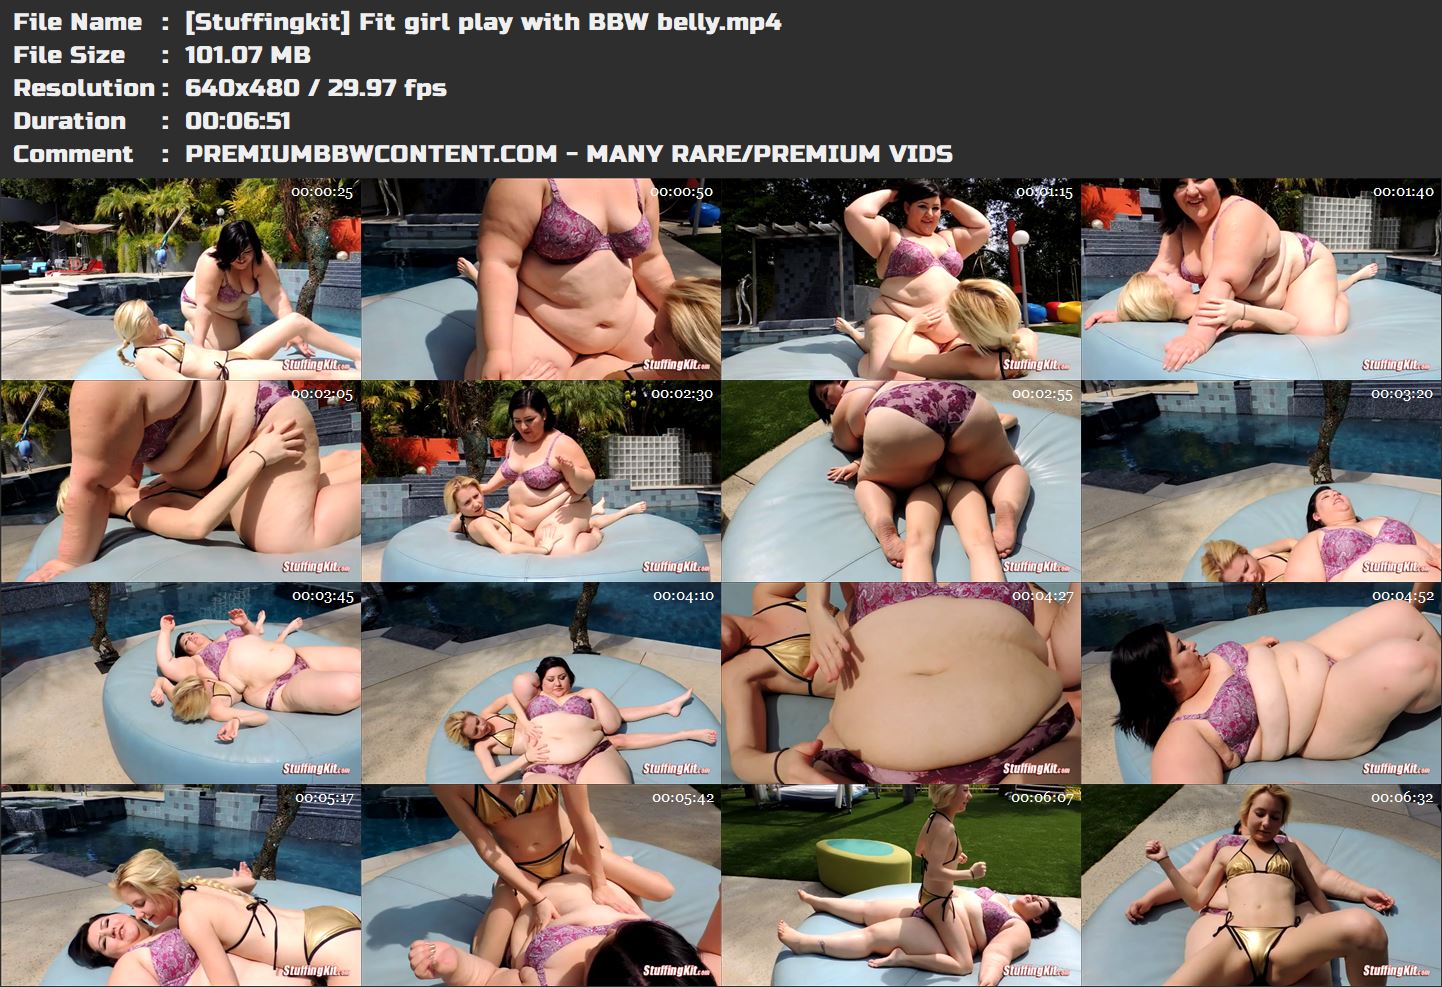 [Stuffingkit] Fit girl play with BBW belly thumbnails